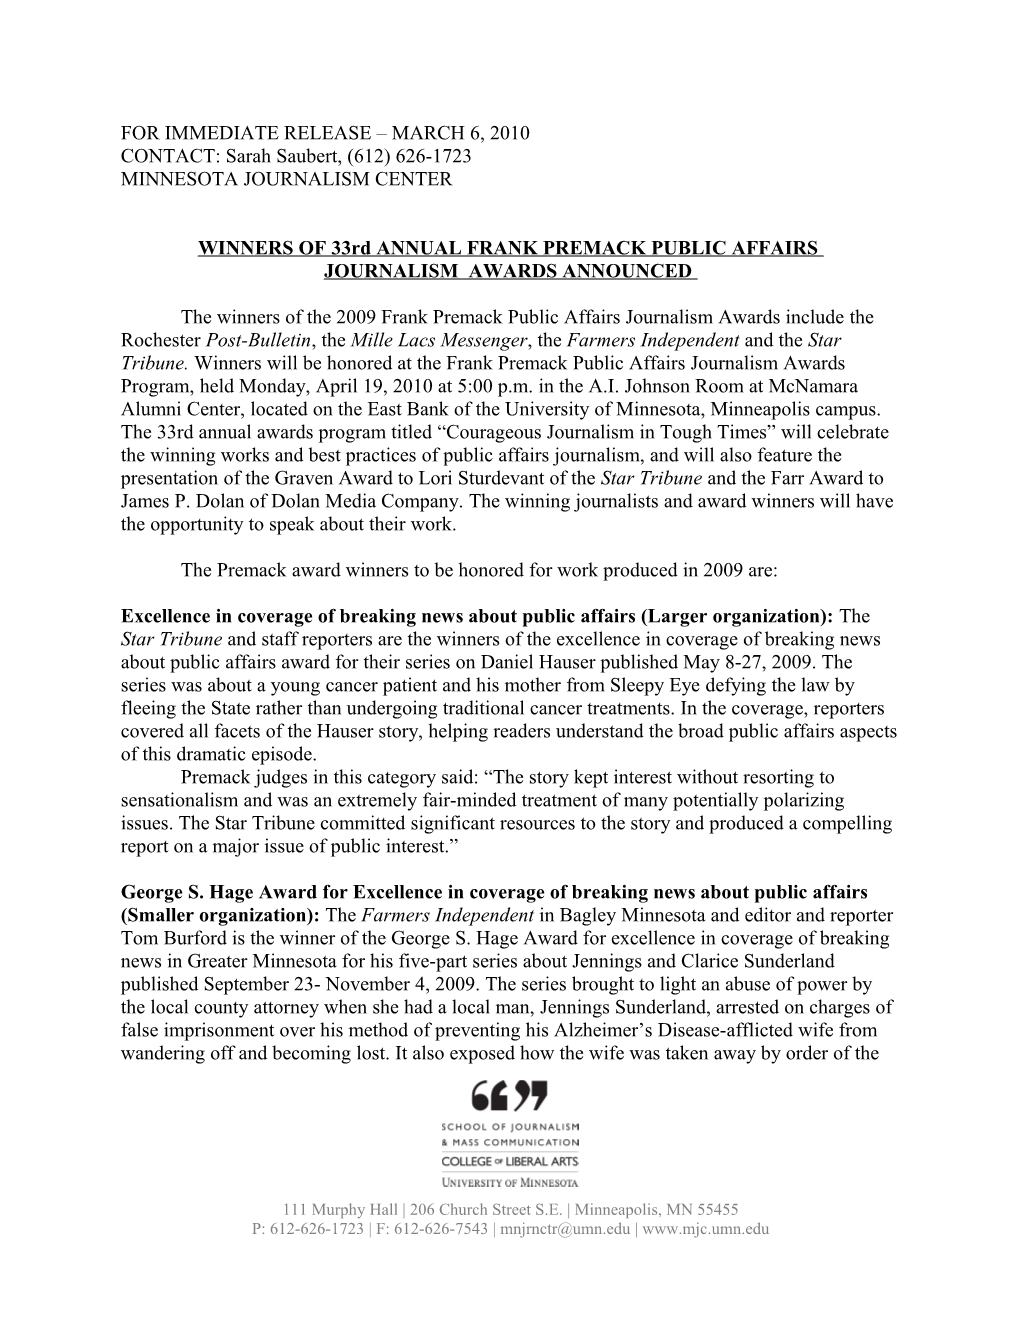 For Immediate Release March 8, 2008